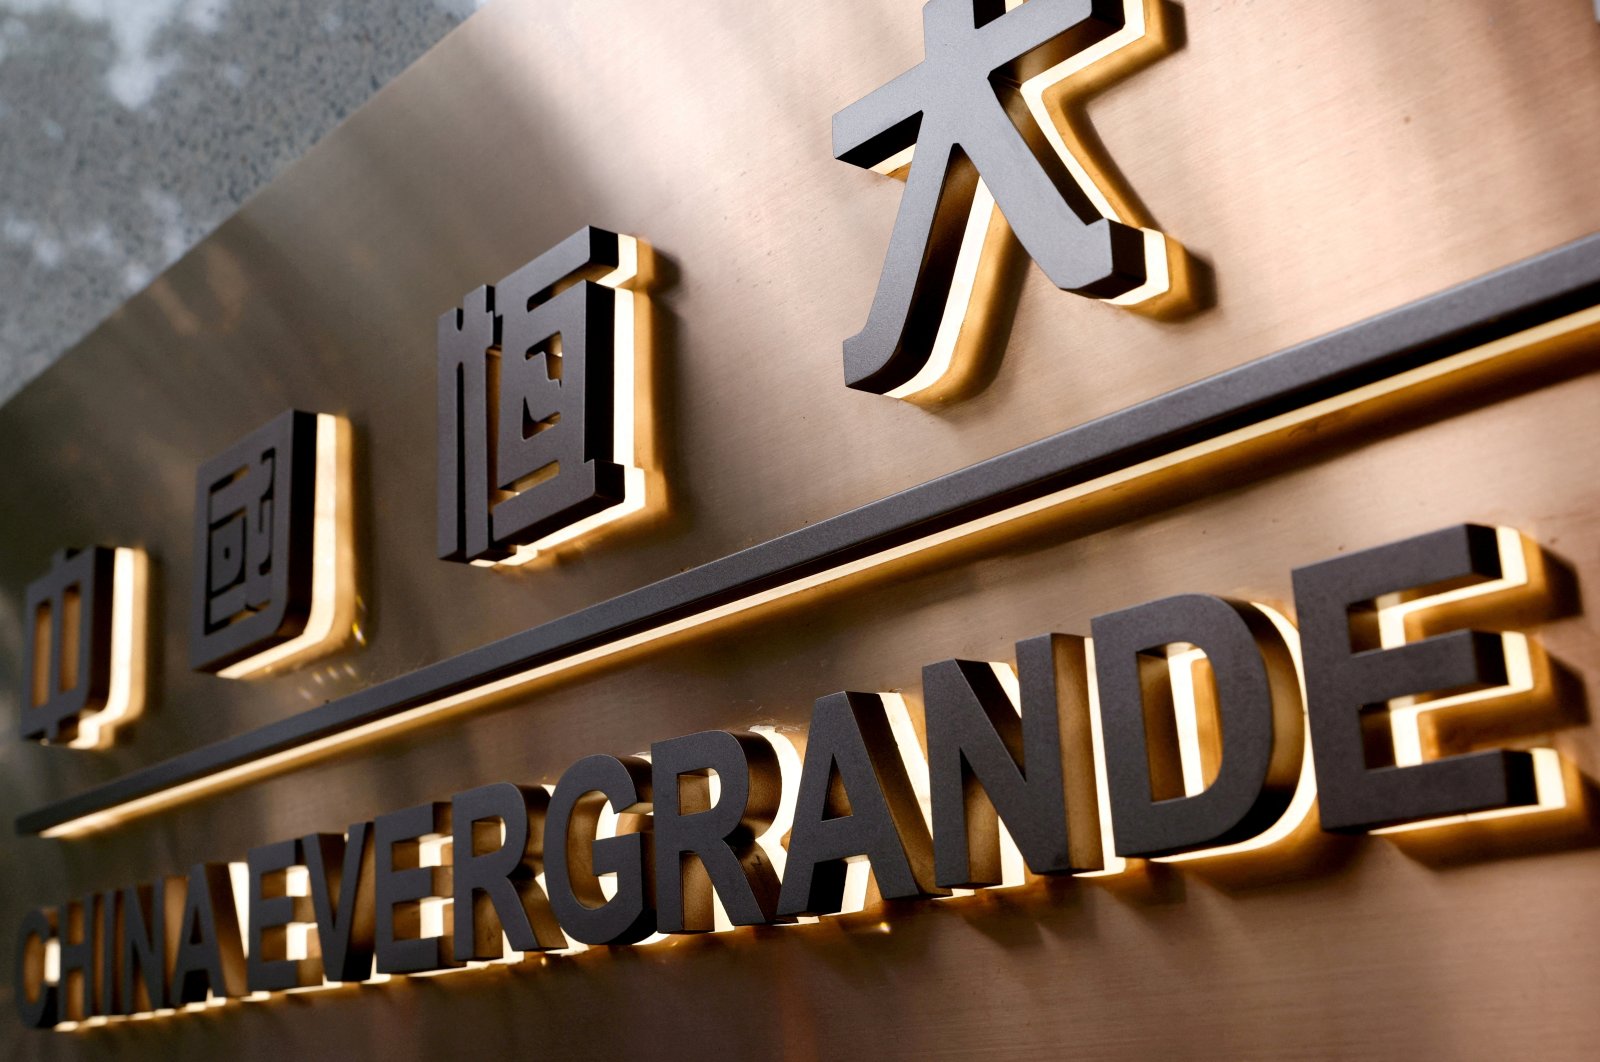 The China Evergrande Centre building sign is seen in Hong Kong, China, Sept. 23, 2021. (Reuters Photo)